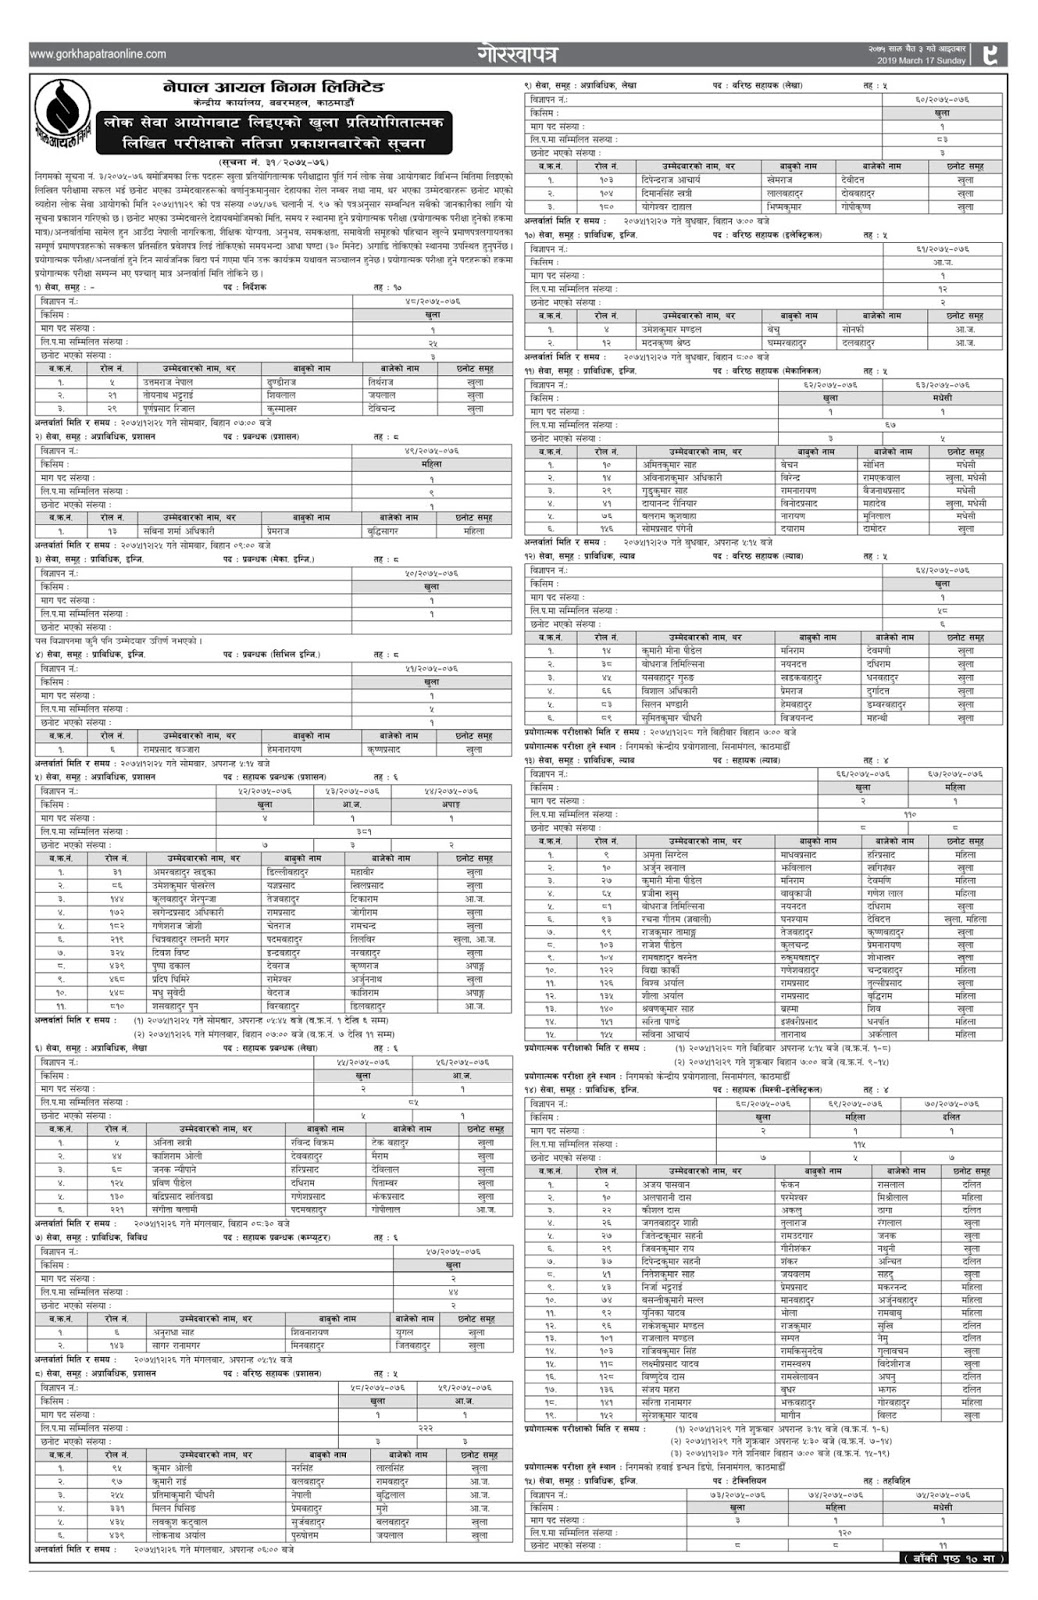 Nepal Oil Corporation Published Results Of Various Posts